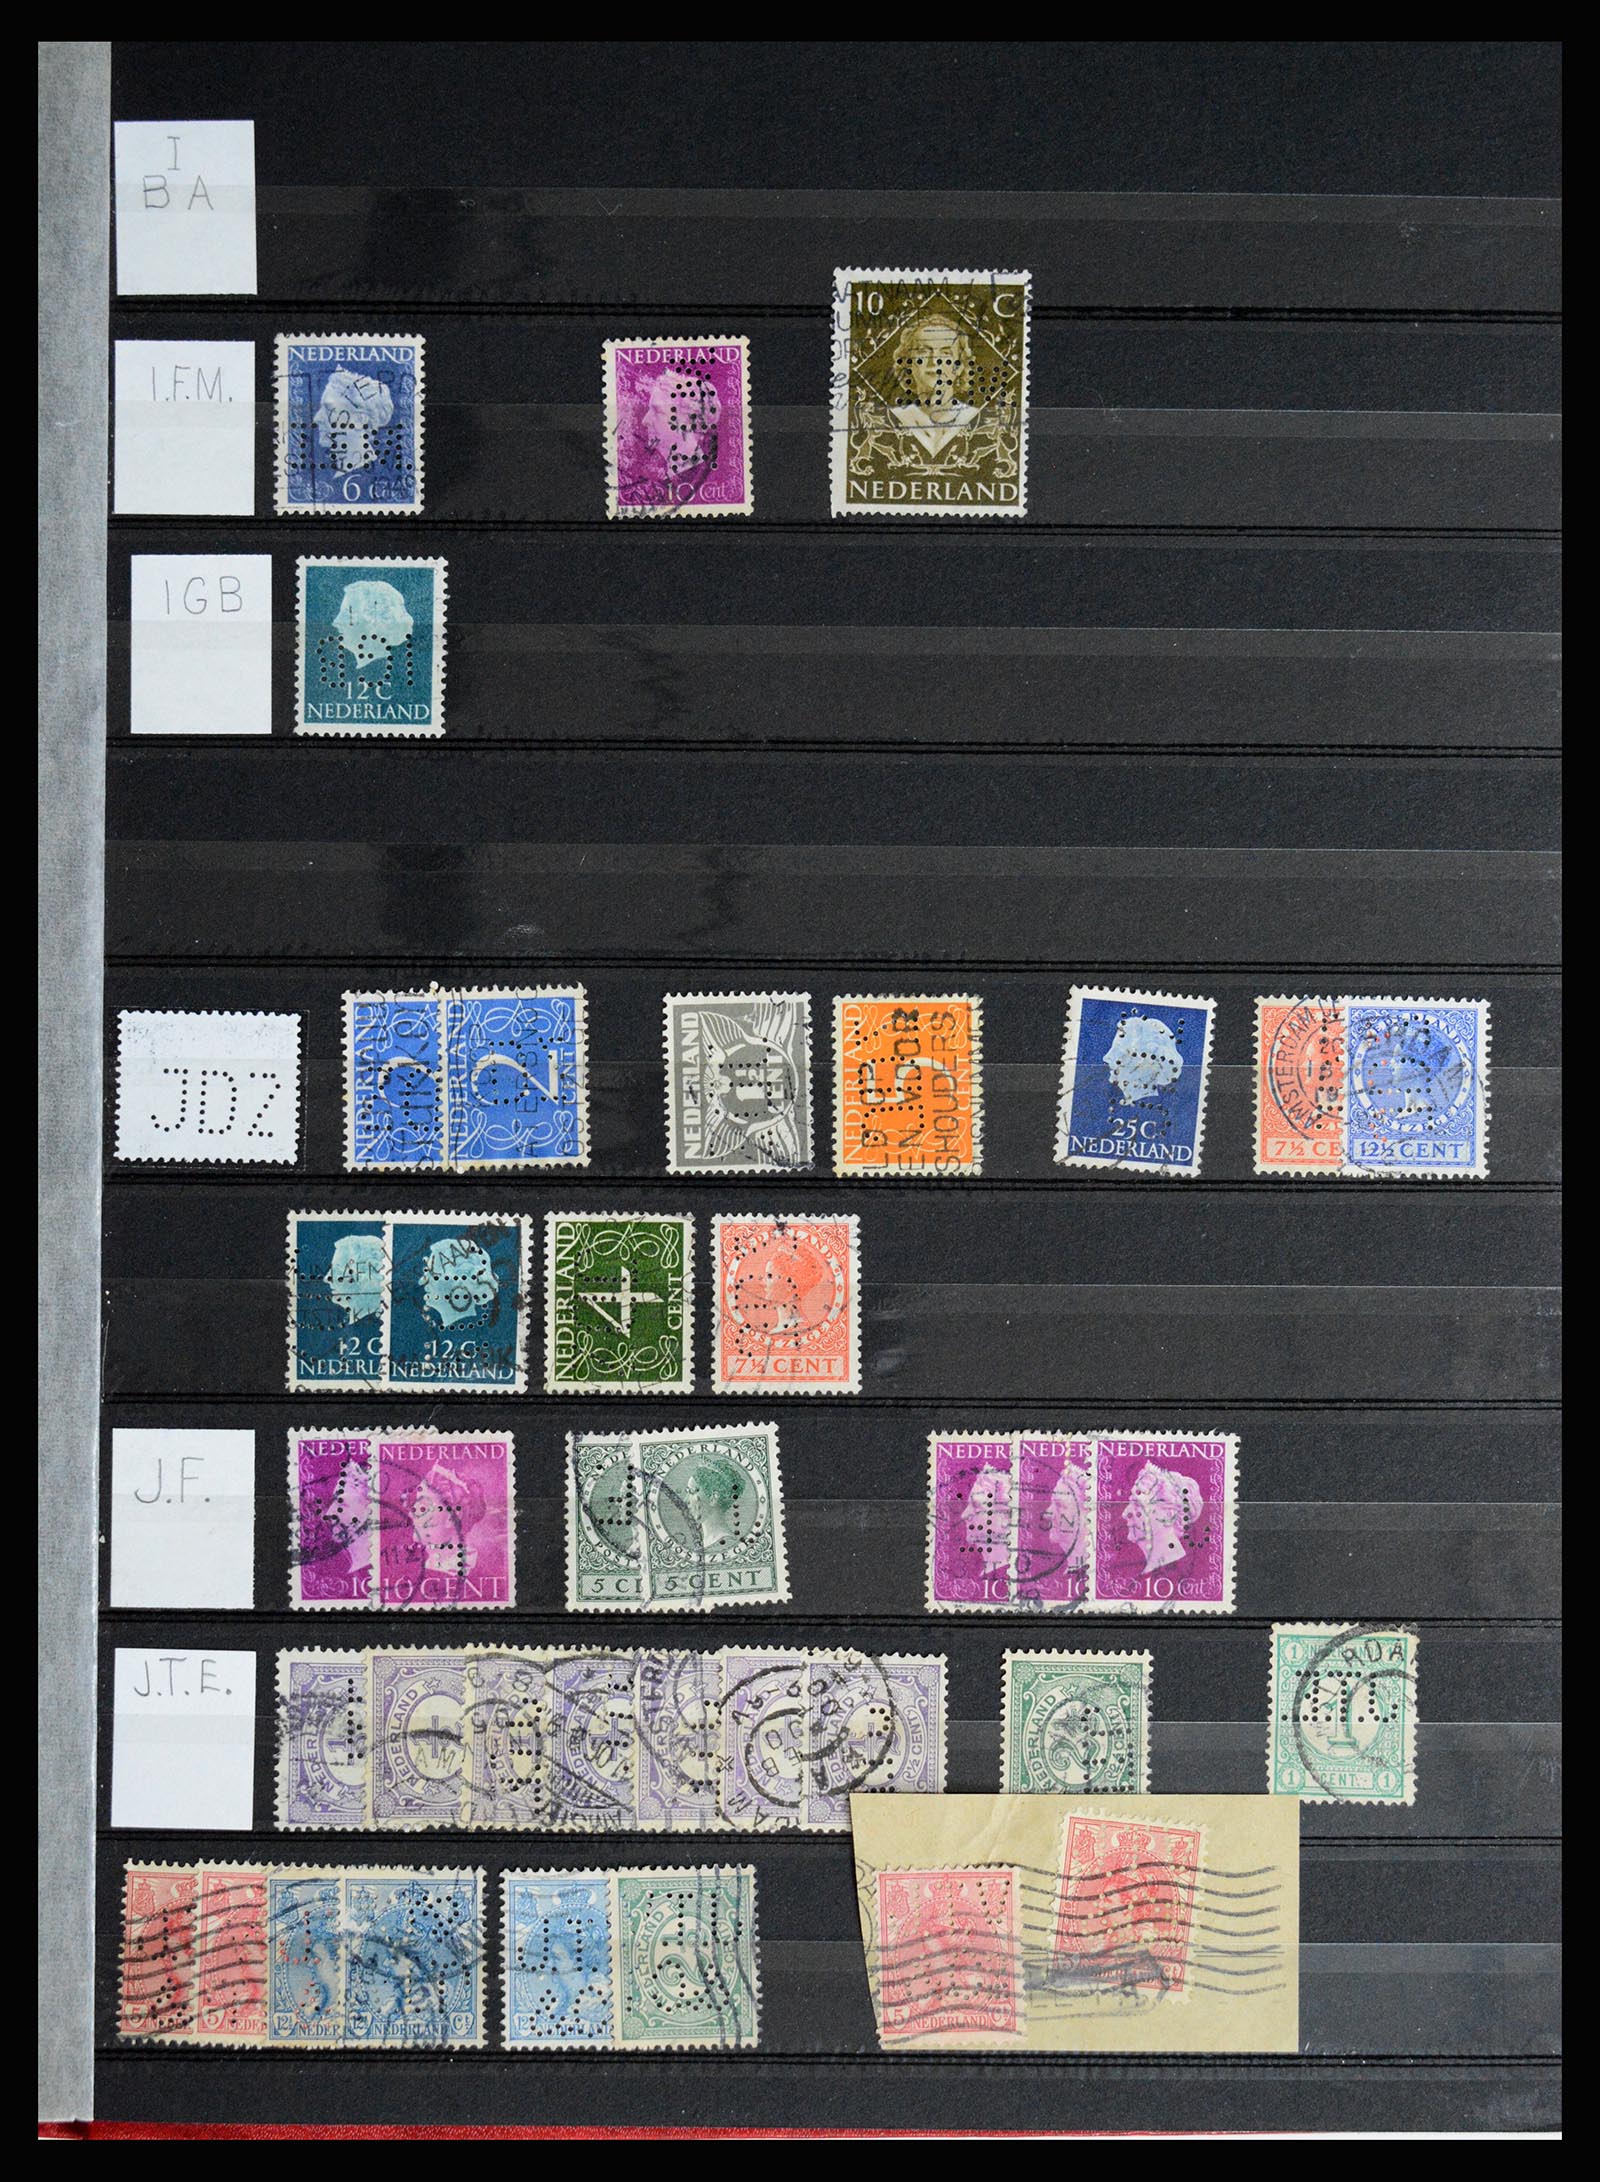 37054 017 - Stamp collection 37054 Netherlands perfins 1890-1960.